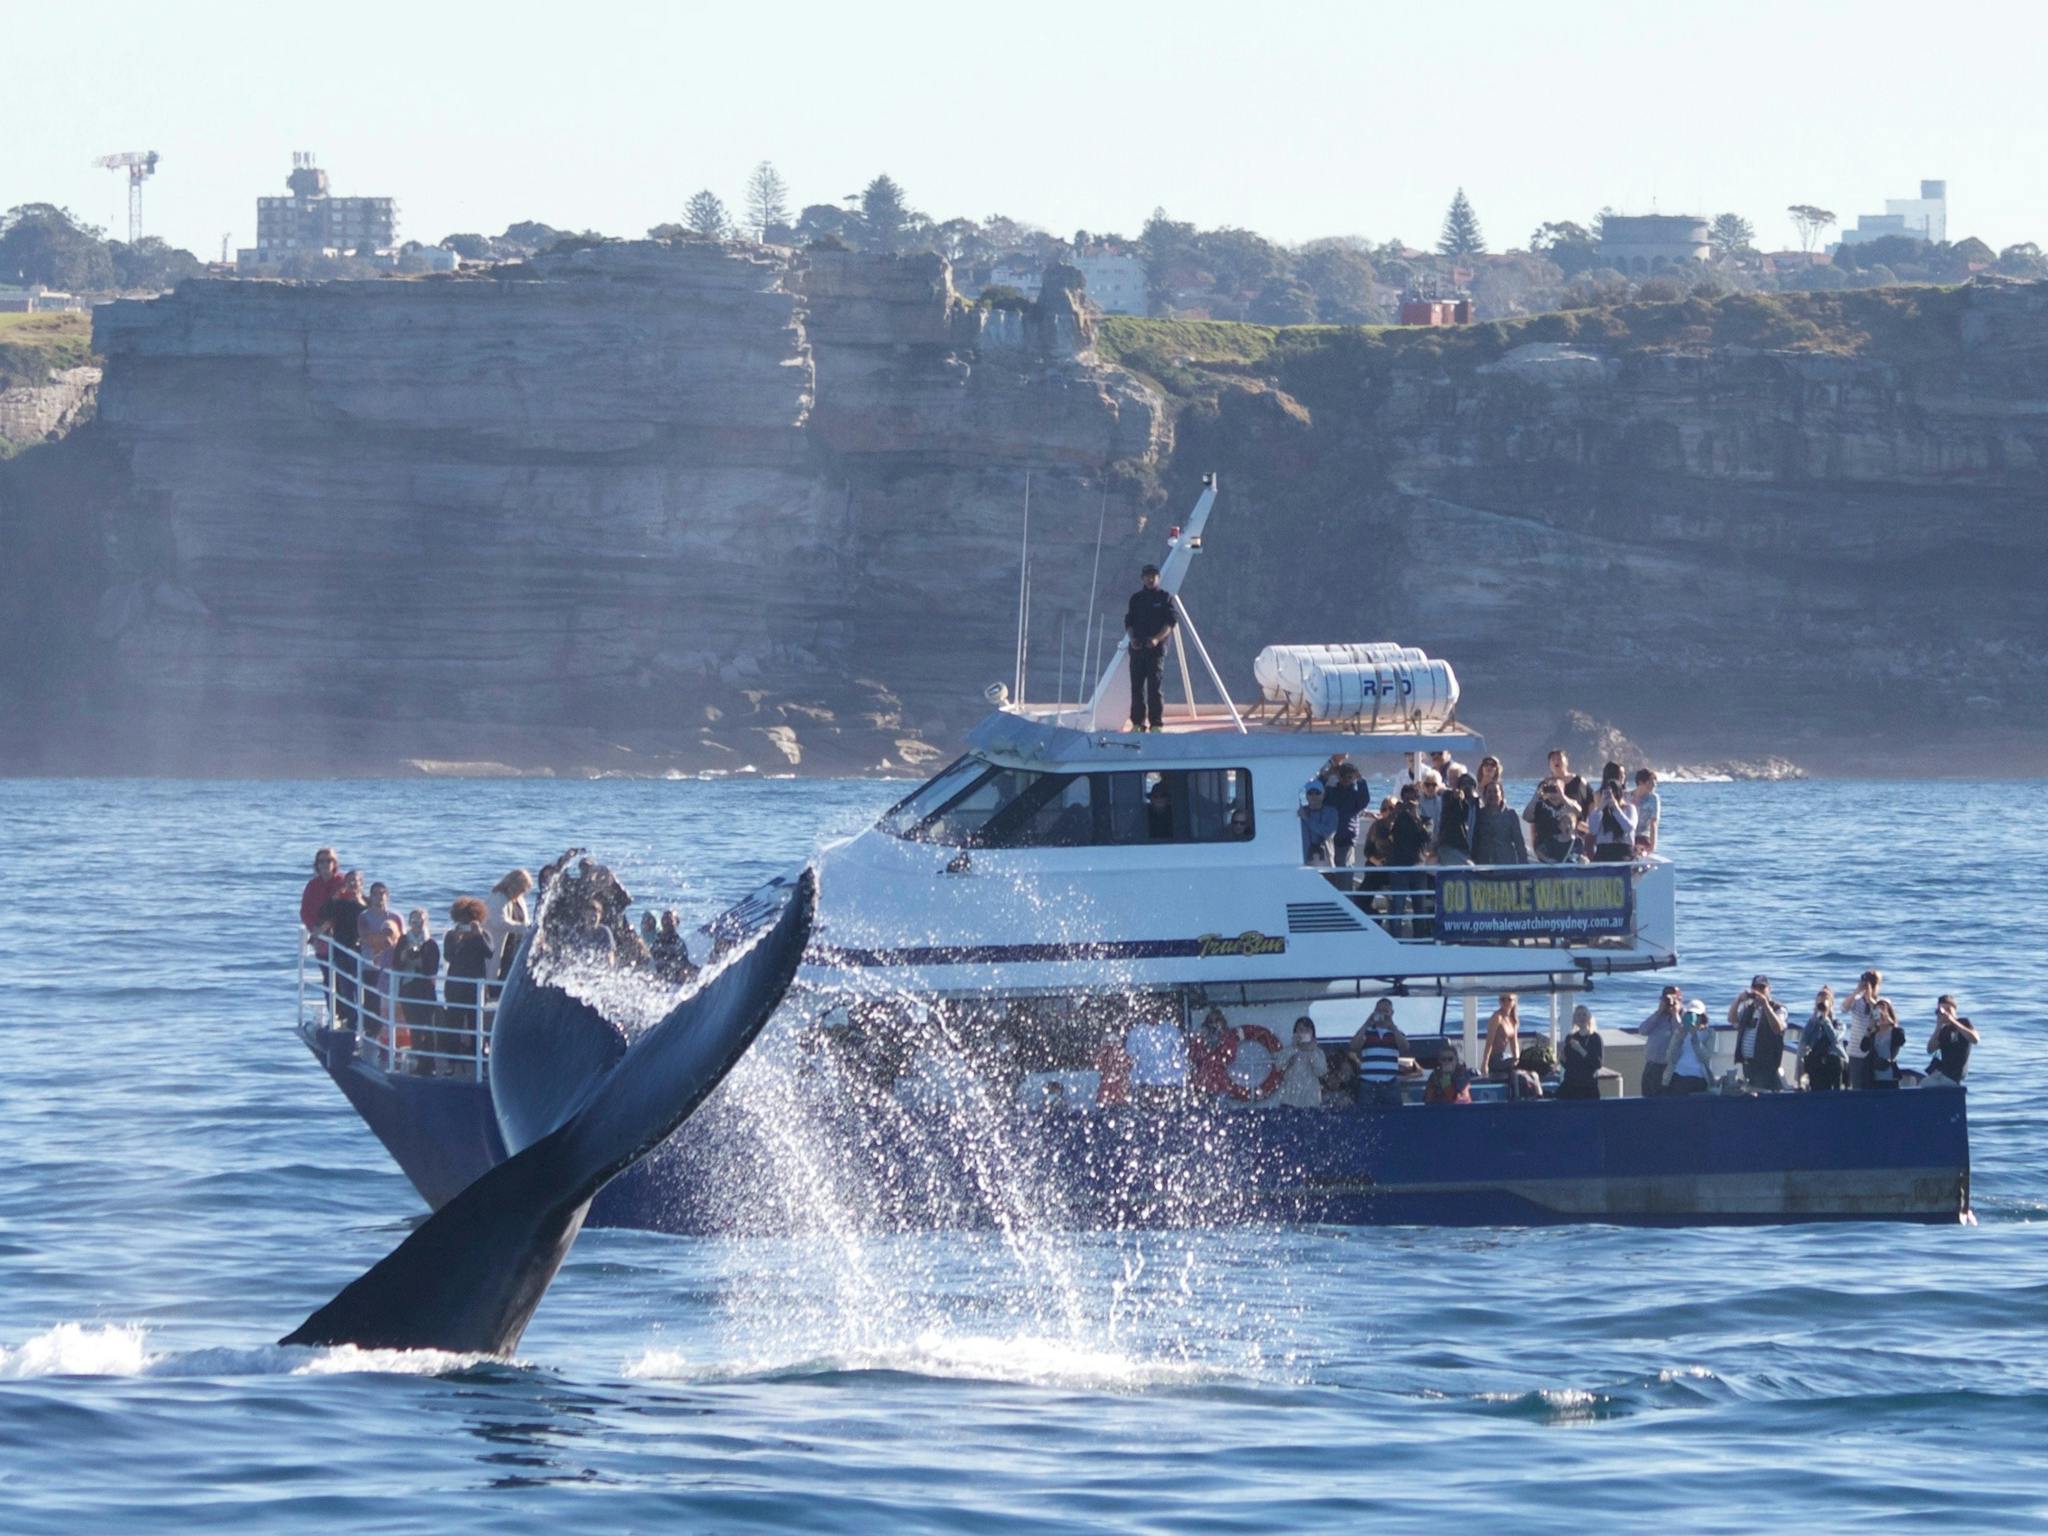 whale watch cruise sydney harbour